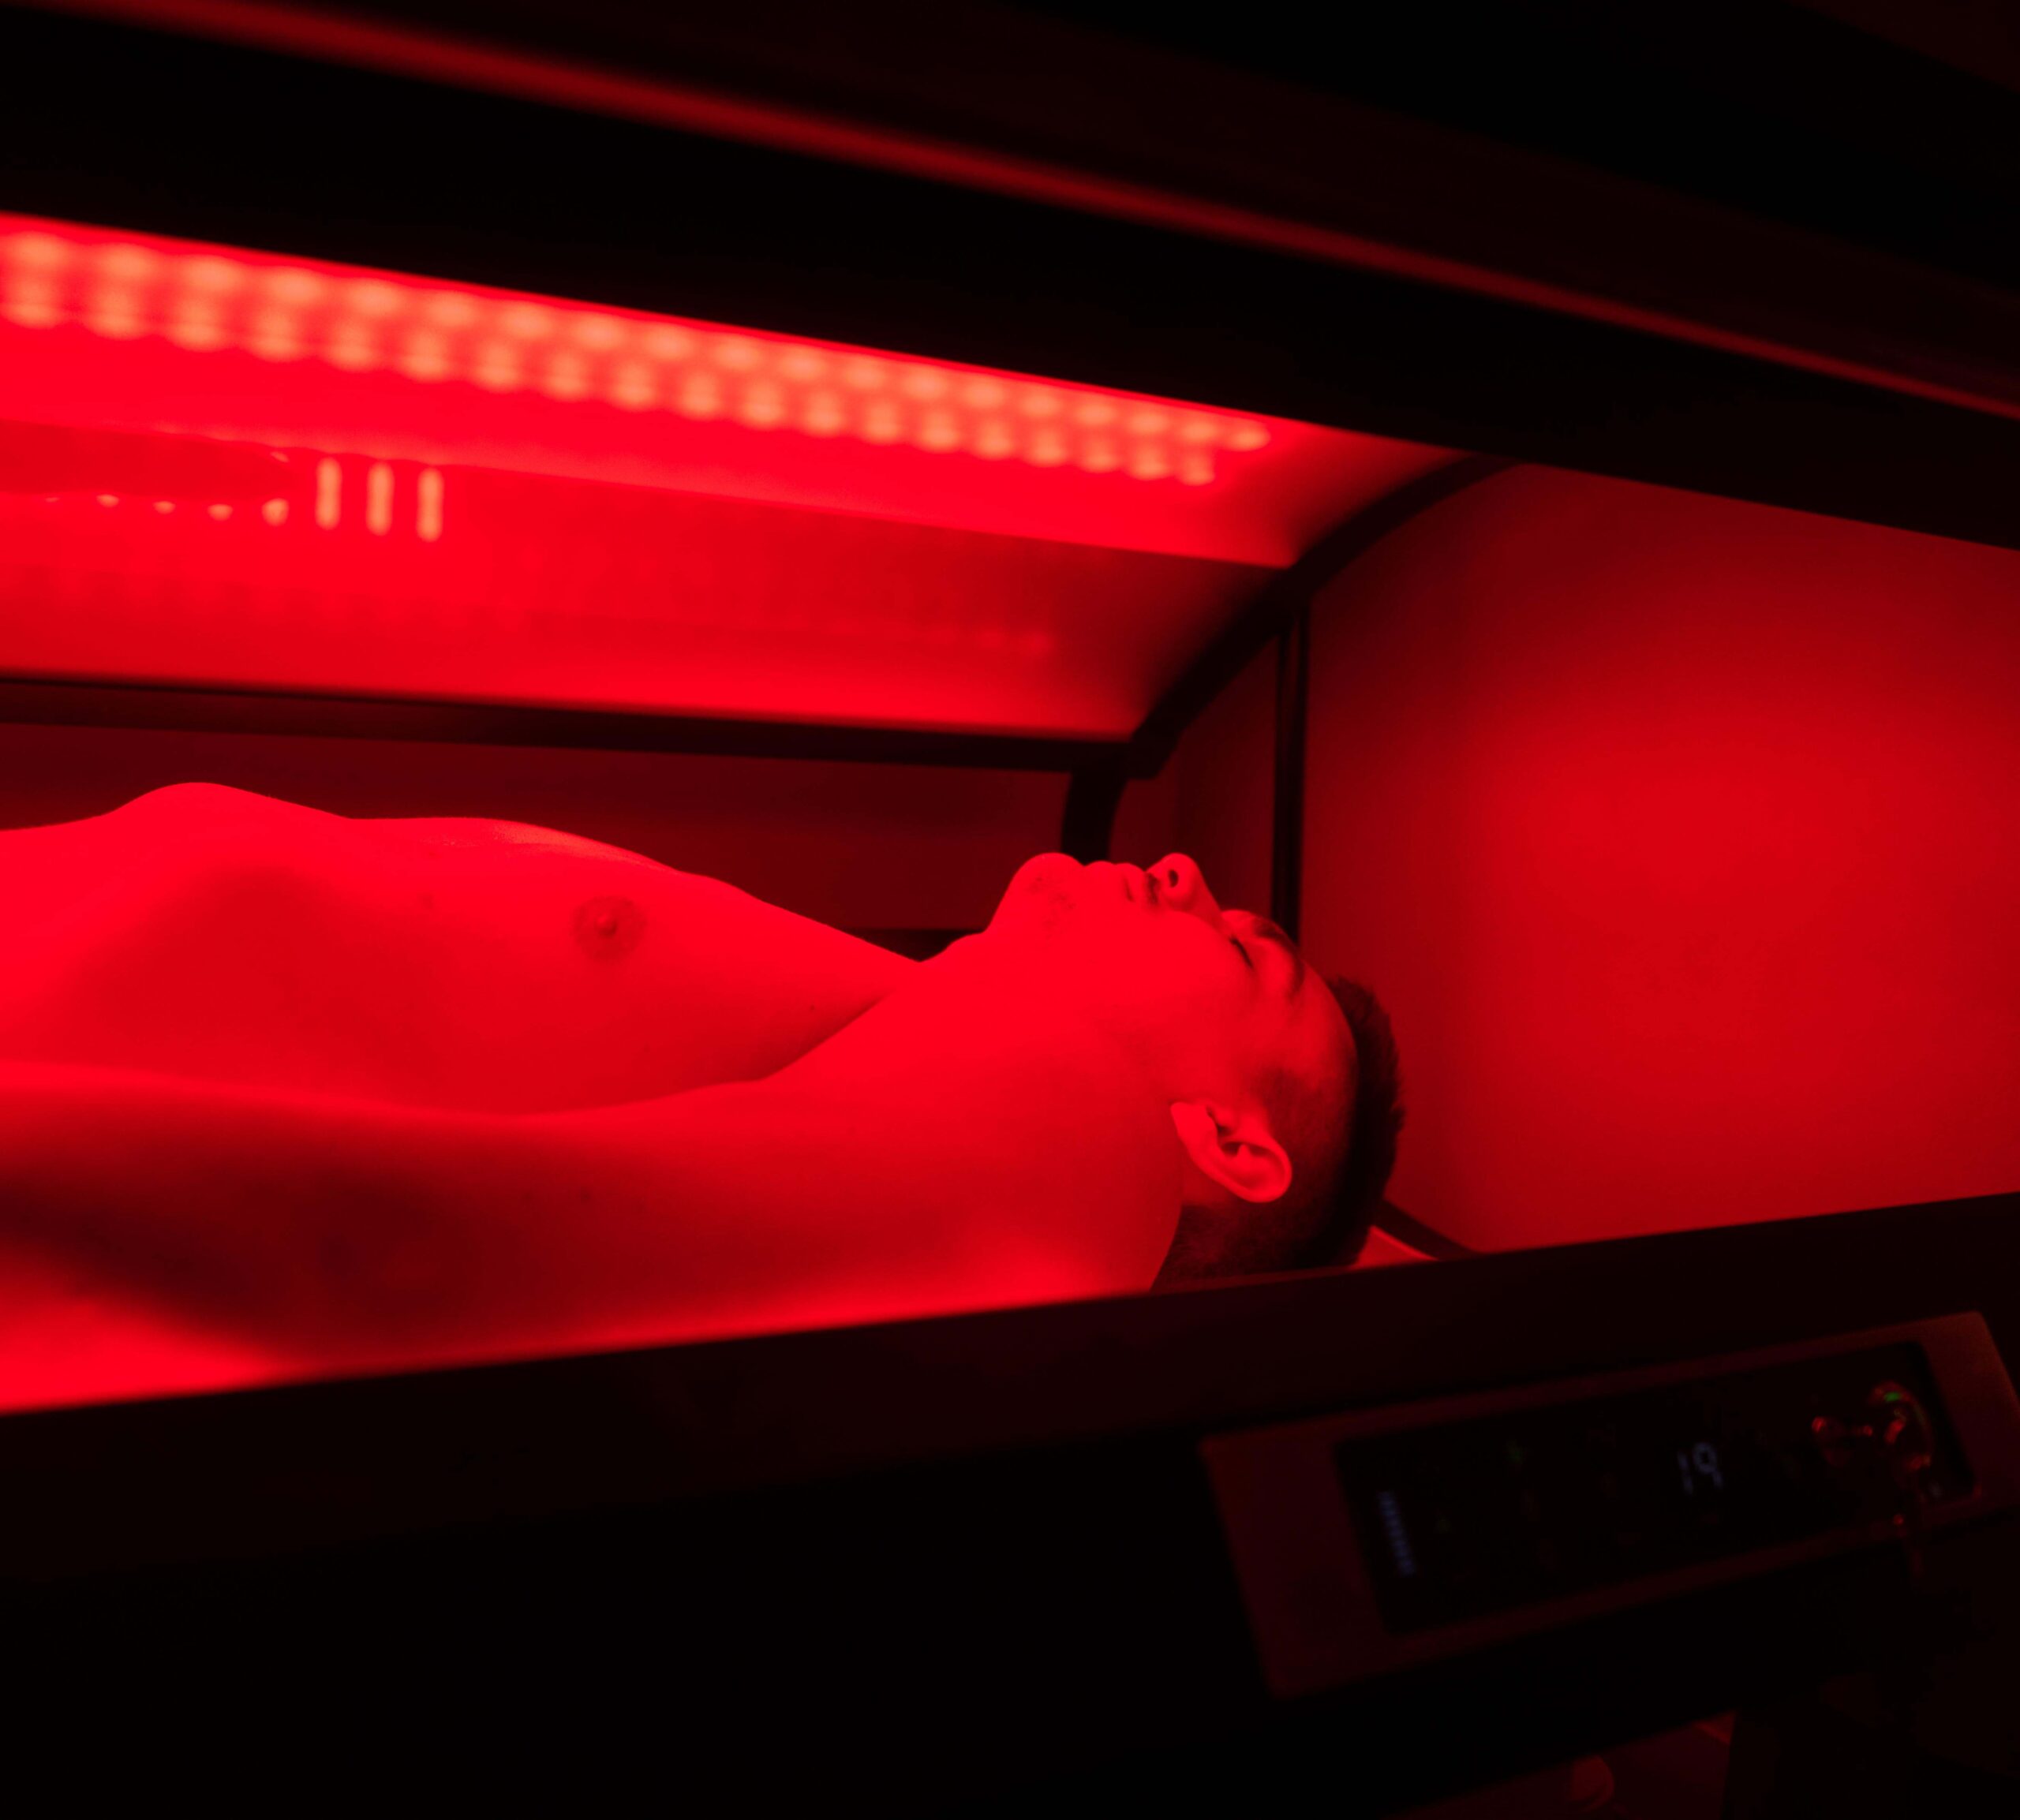 Red Light Therapy for Pain